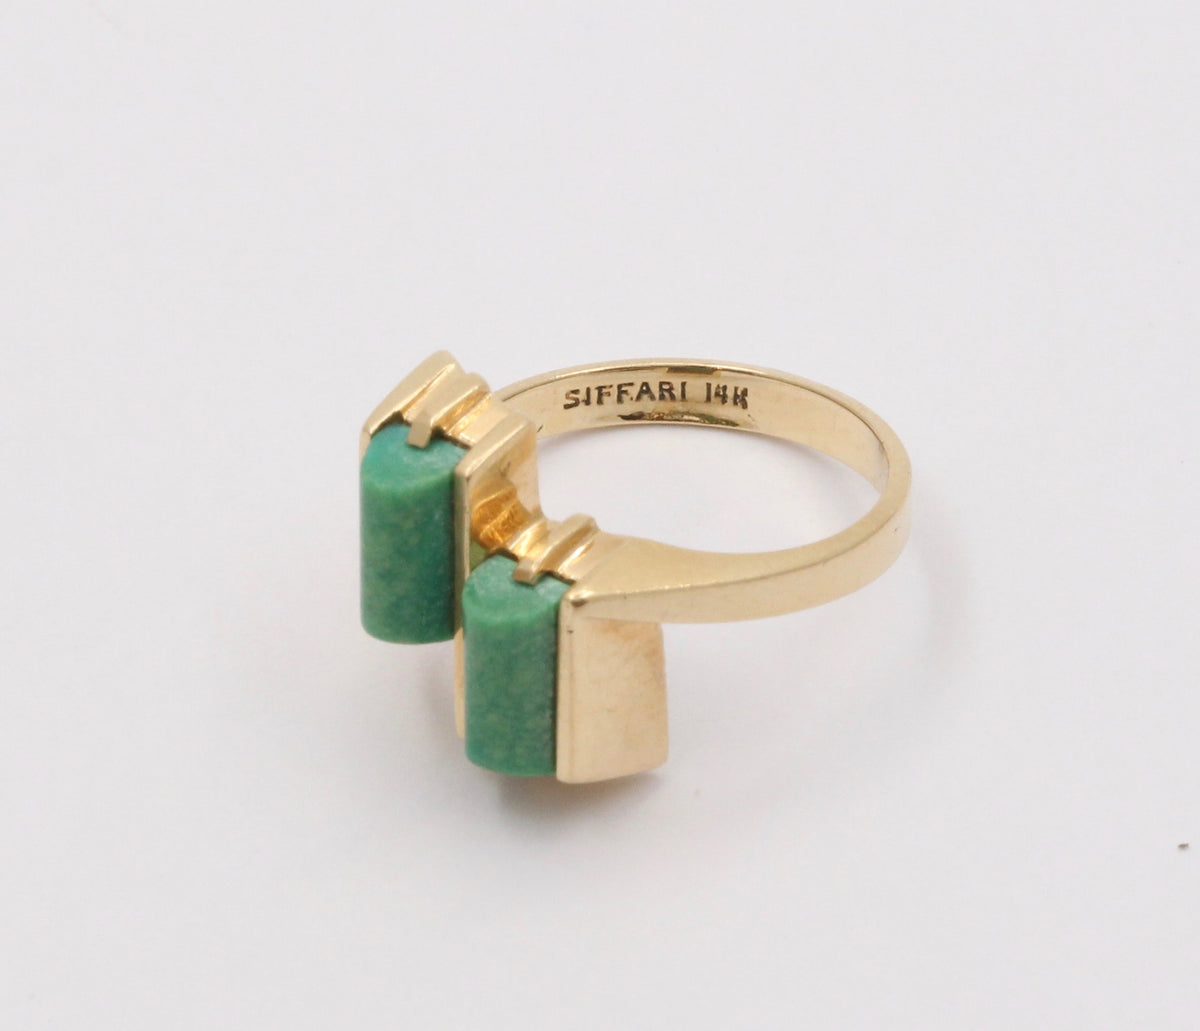 Vintage 14K Gold and Turquoise Geometric Bypass Ring